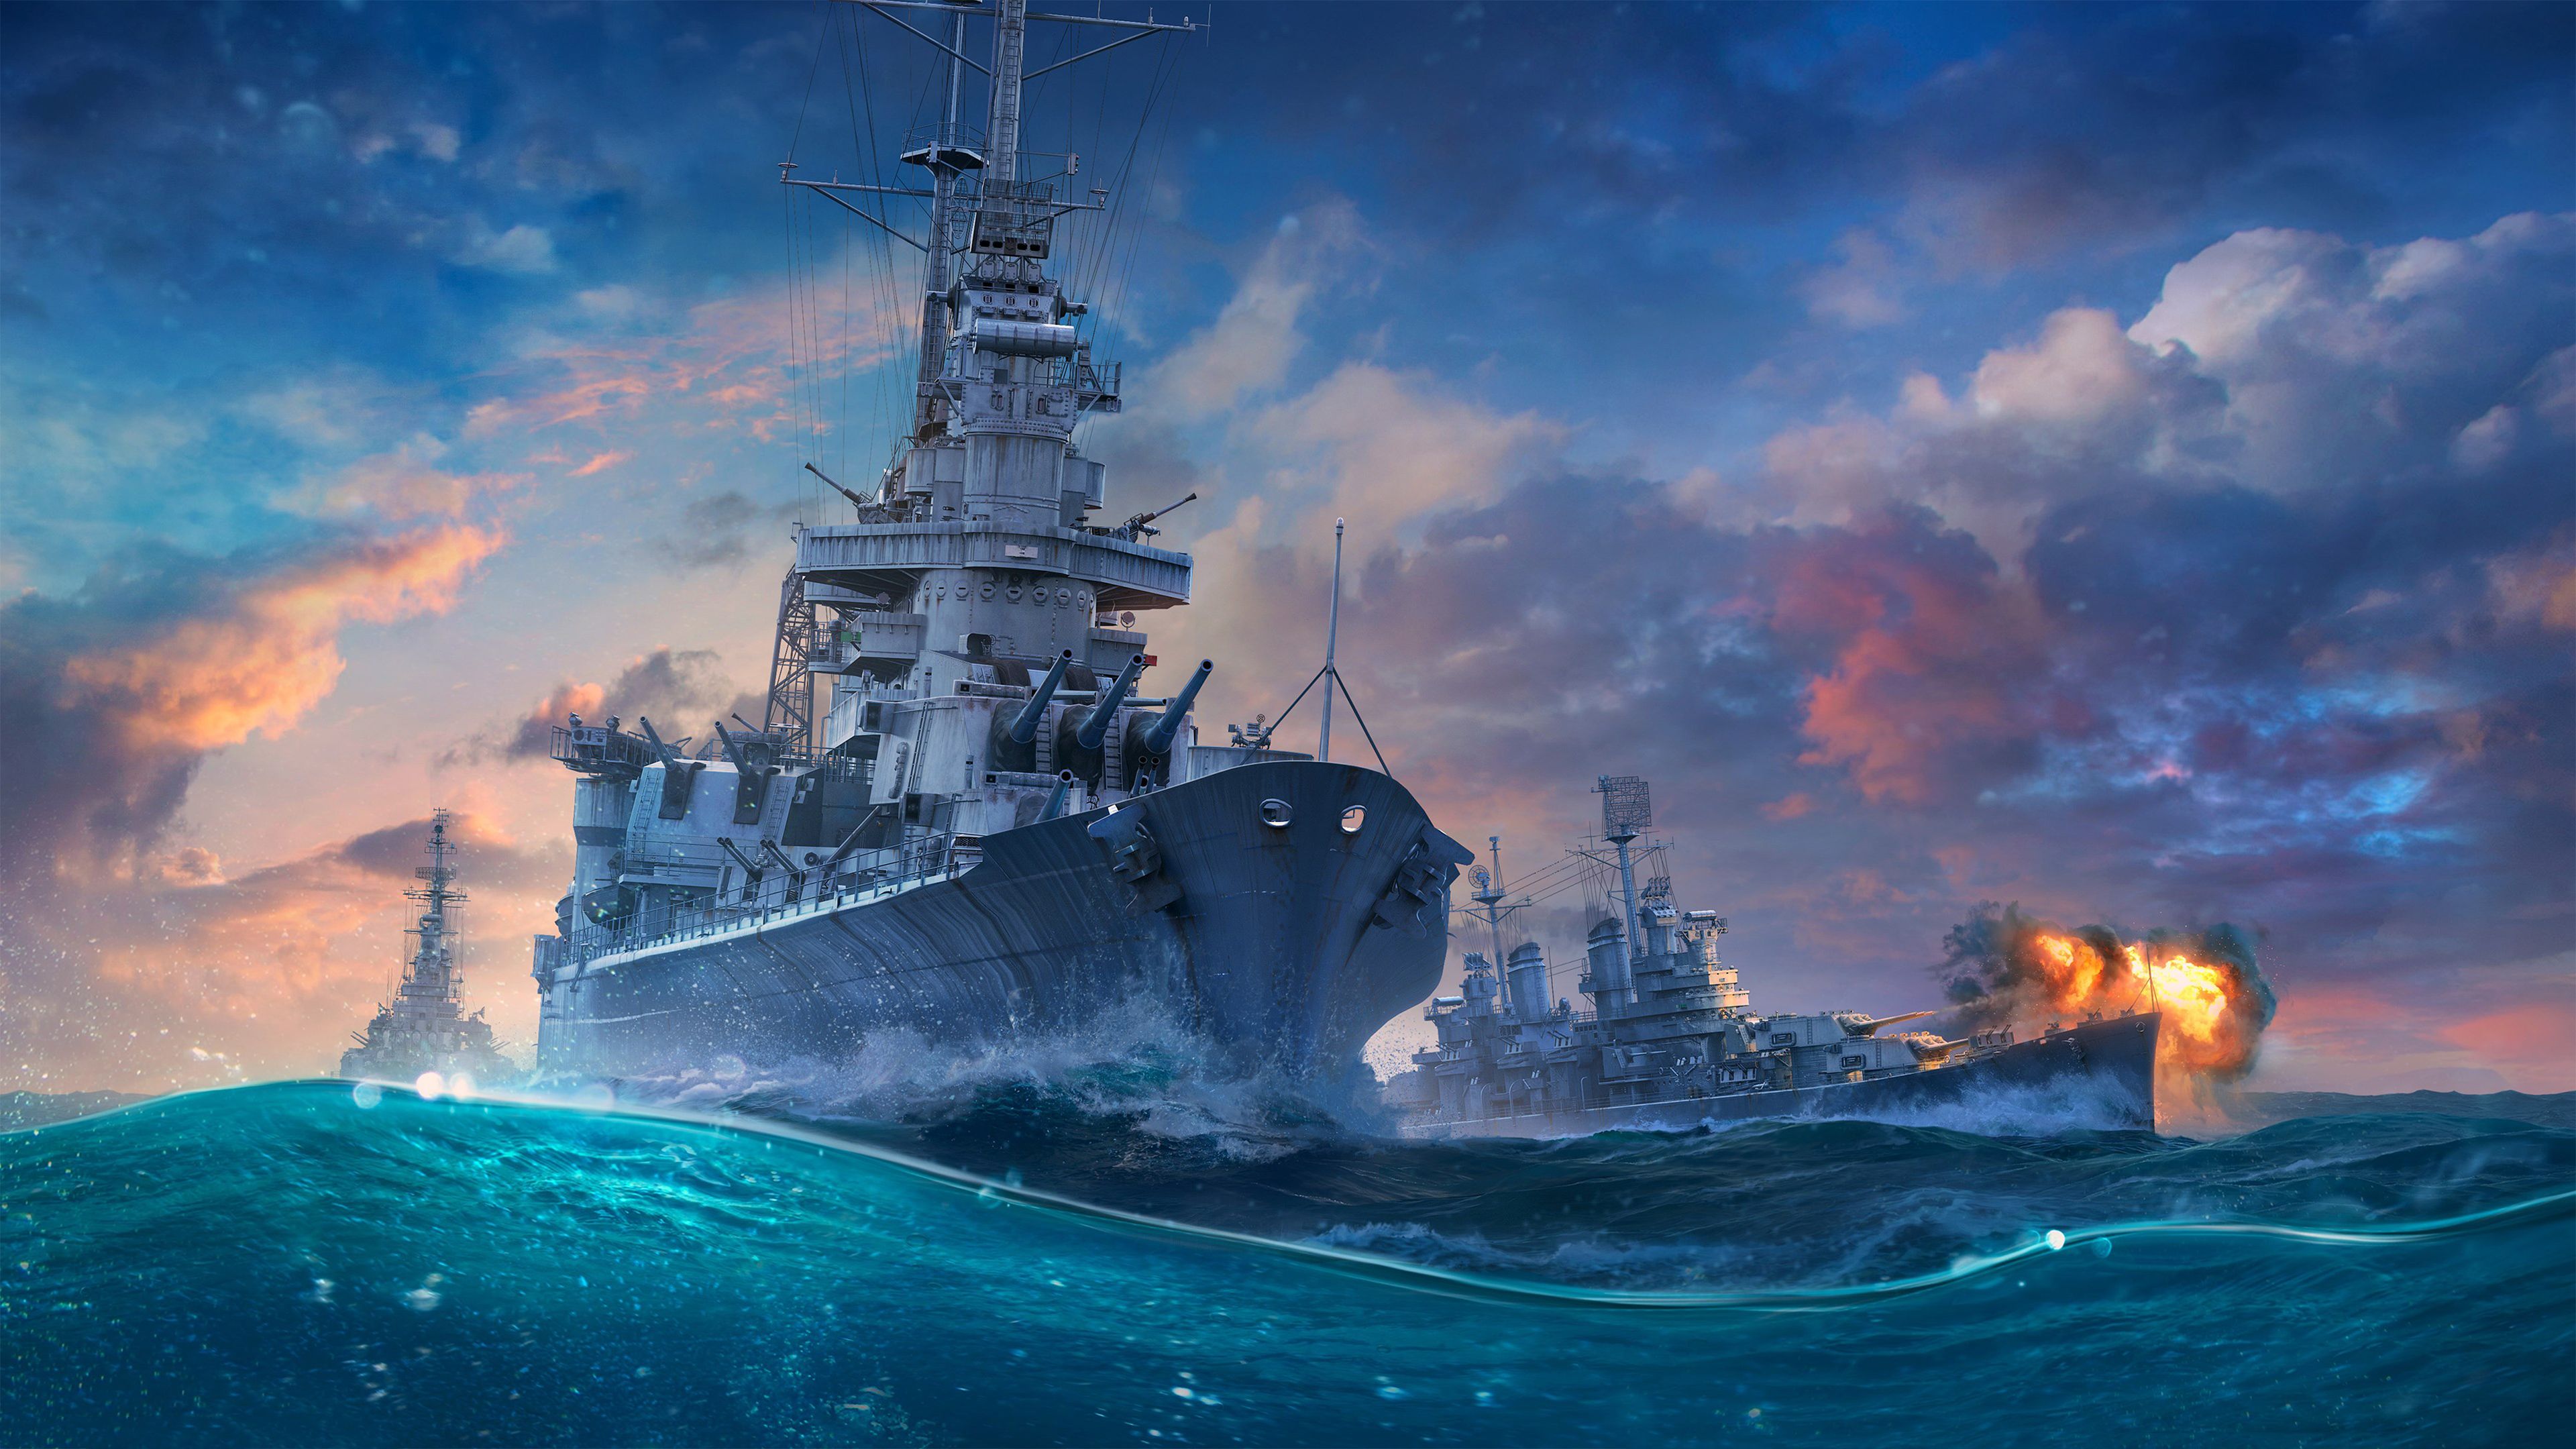 Pacific Warships download the new version for windows